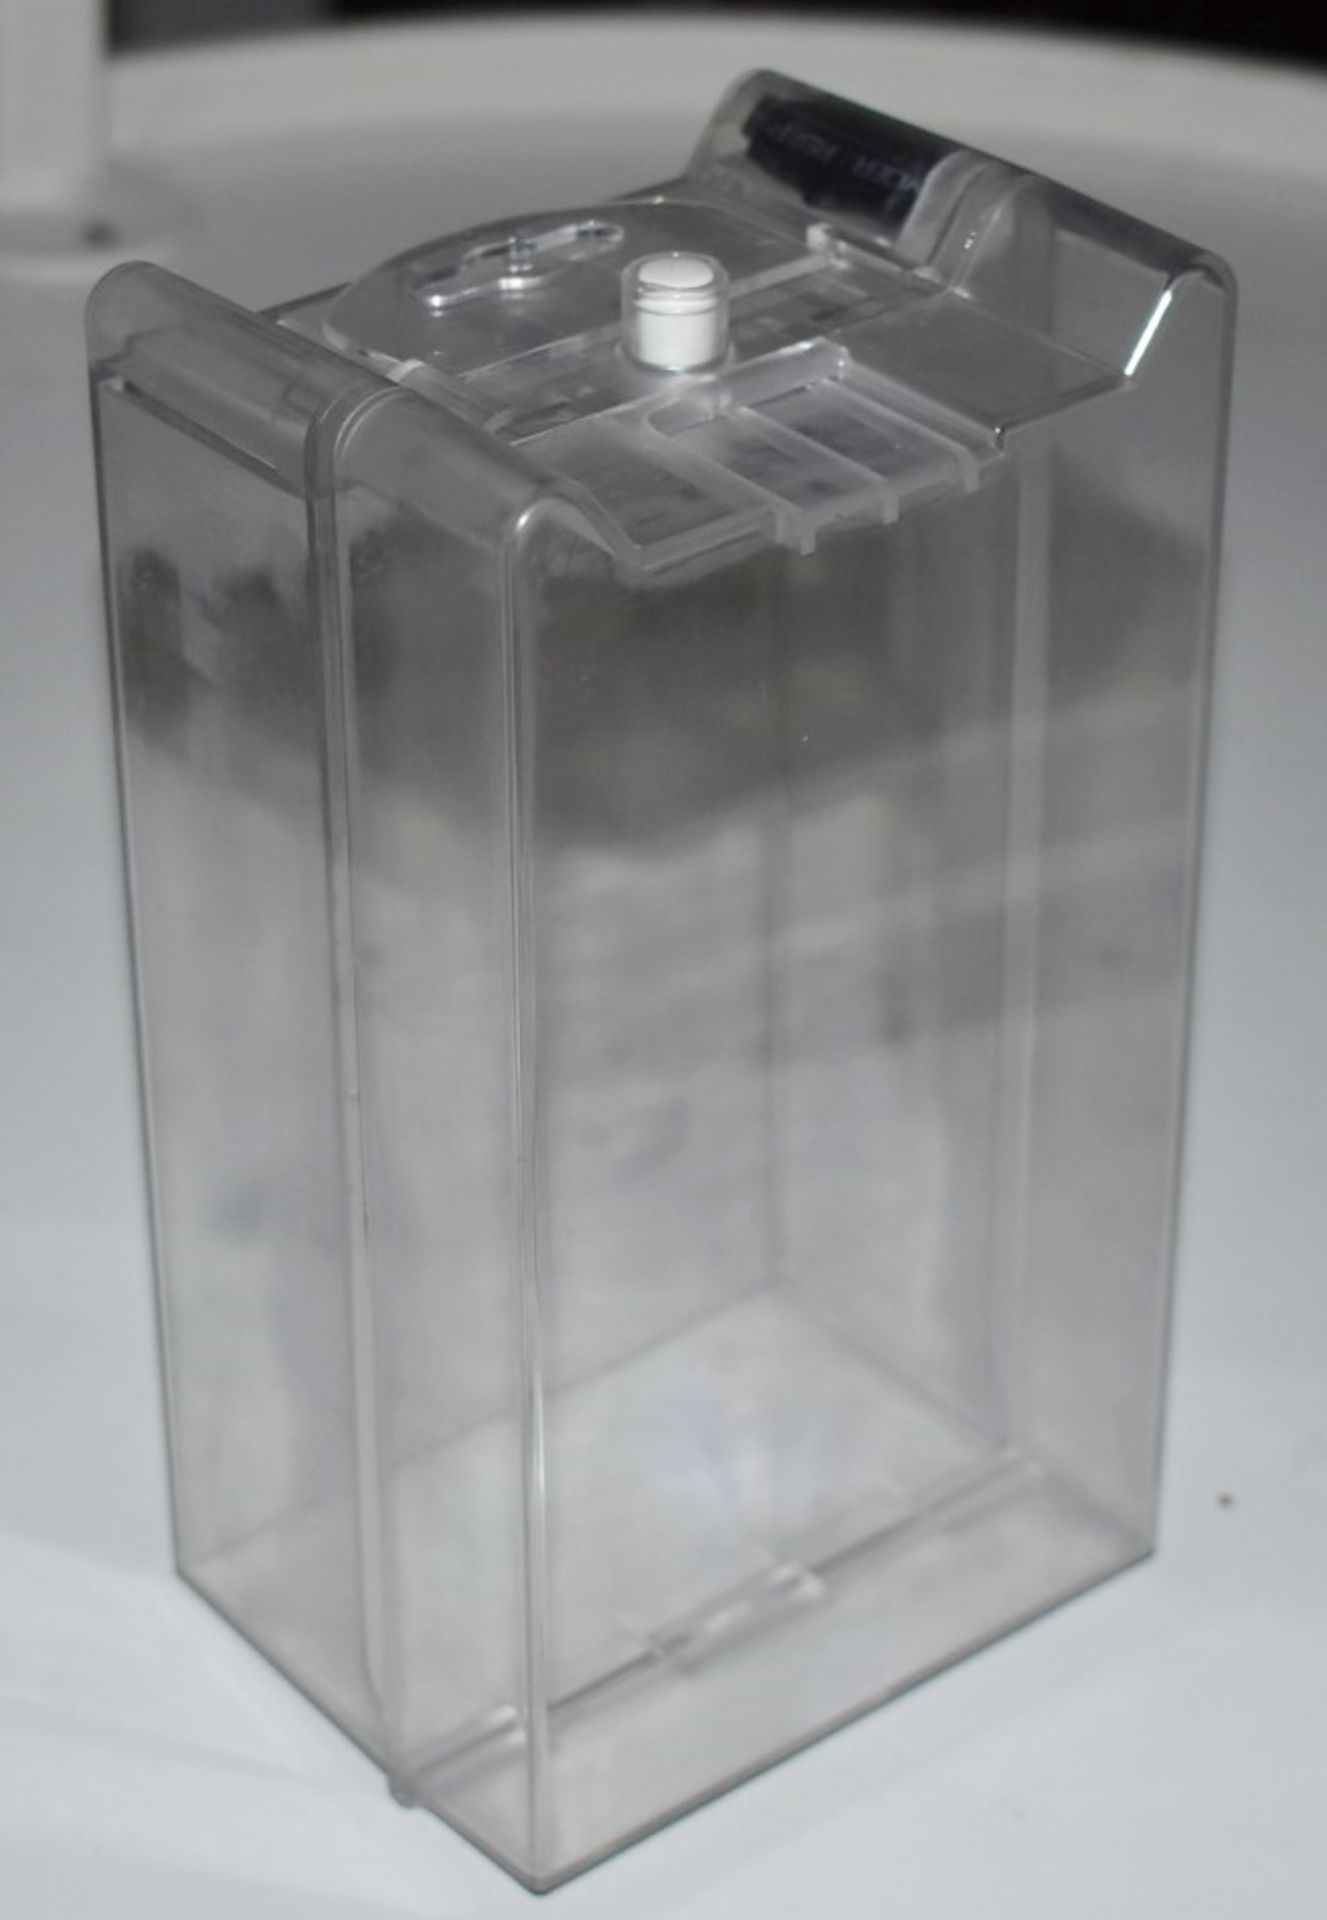 40 x Catalyst Clear Acrylic Retail Security Safer Cases With RF Tags and Hanging Tags - Brand New - Image 3 of 8